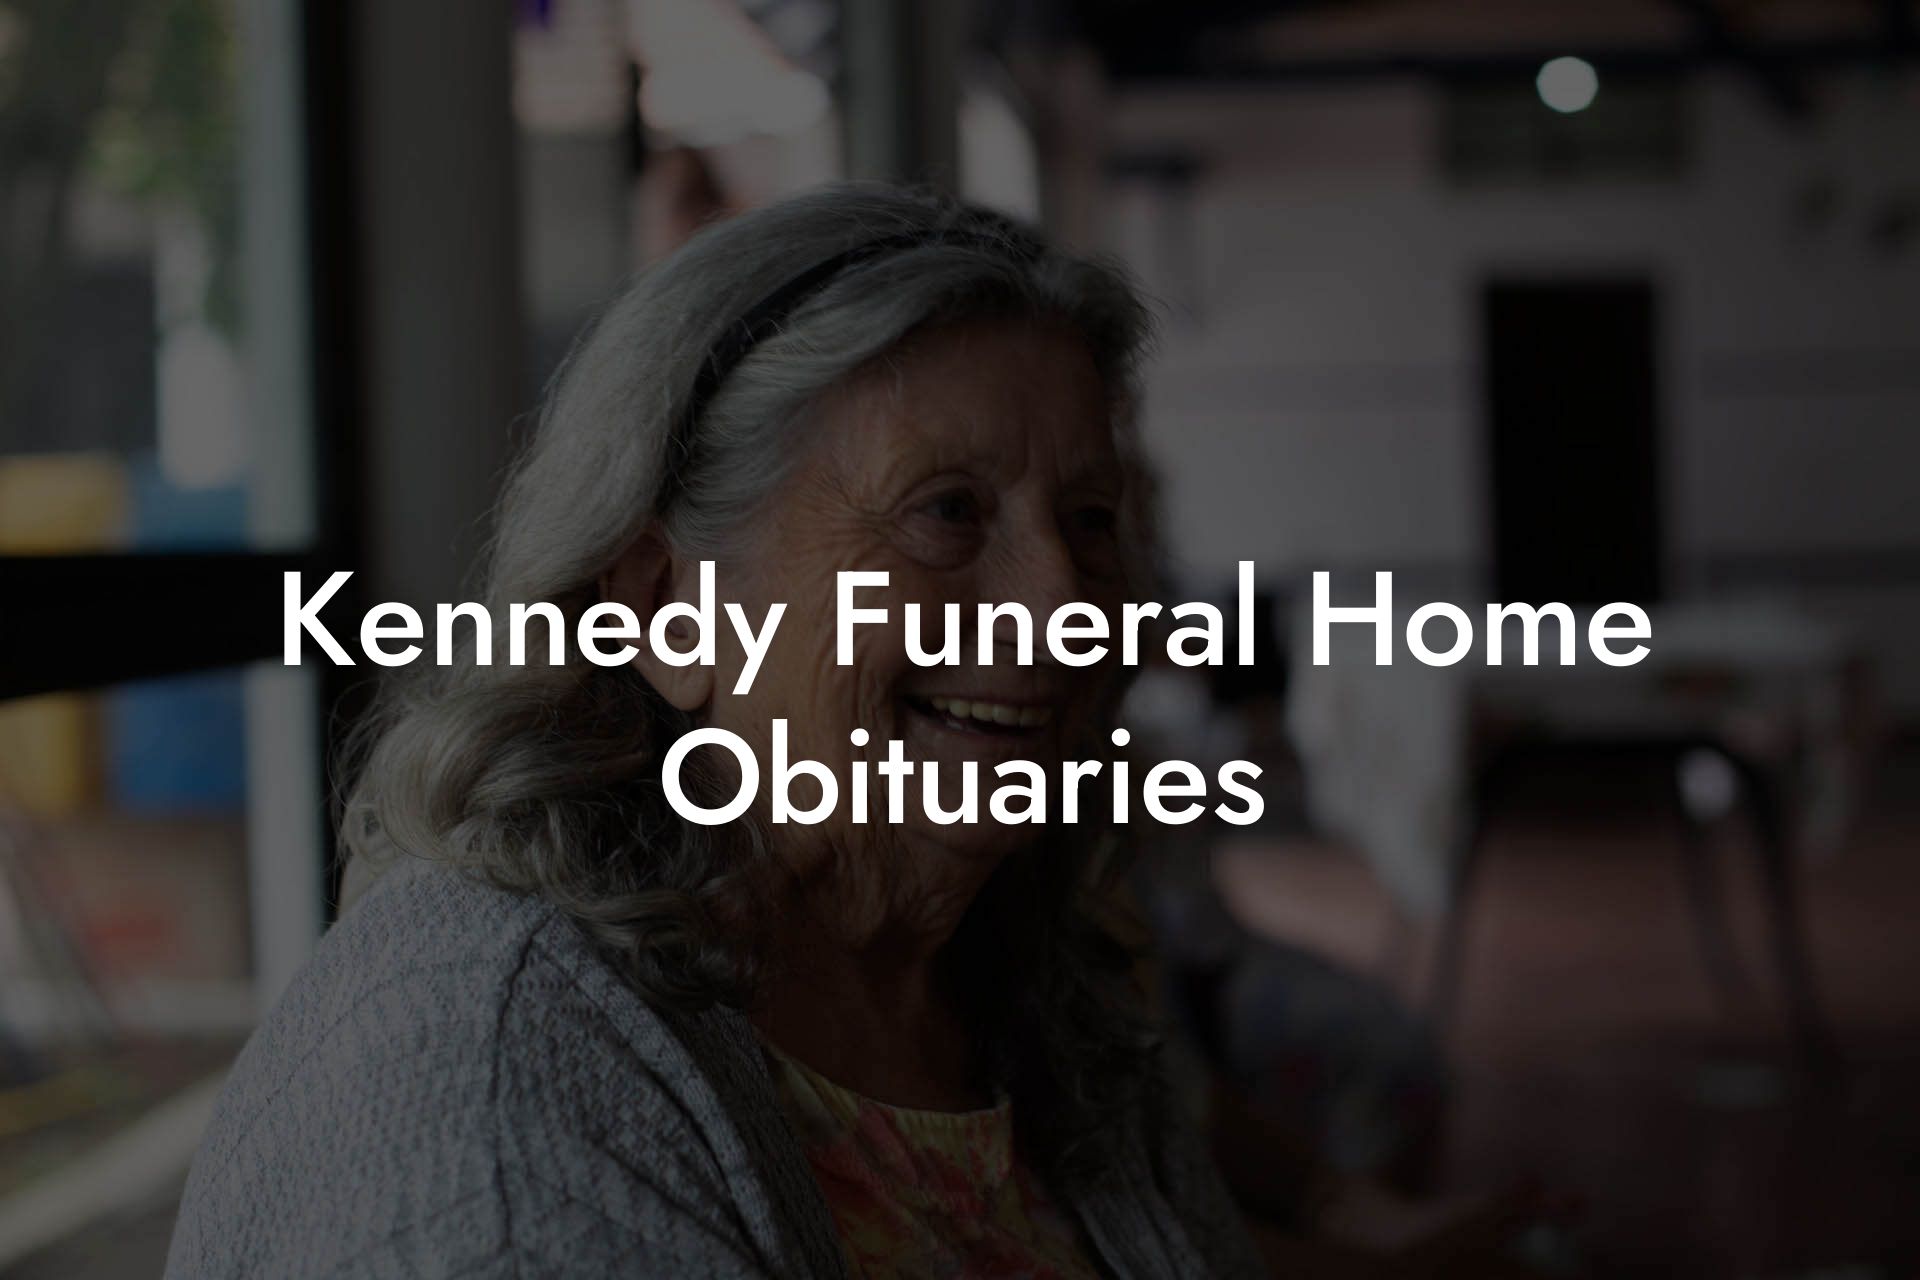 Kennedy Funeral Home Obituaries